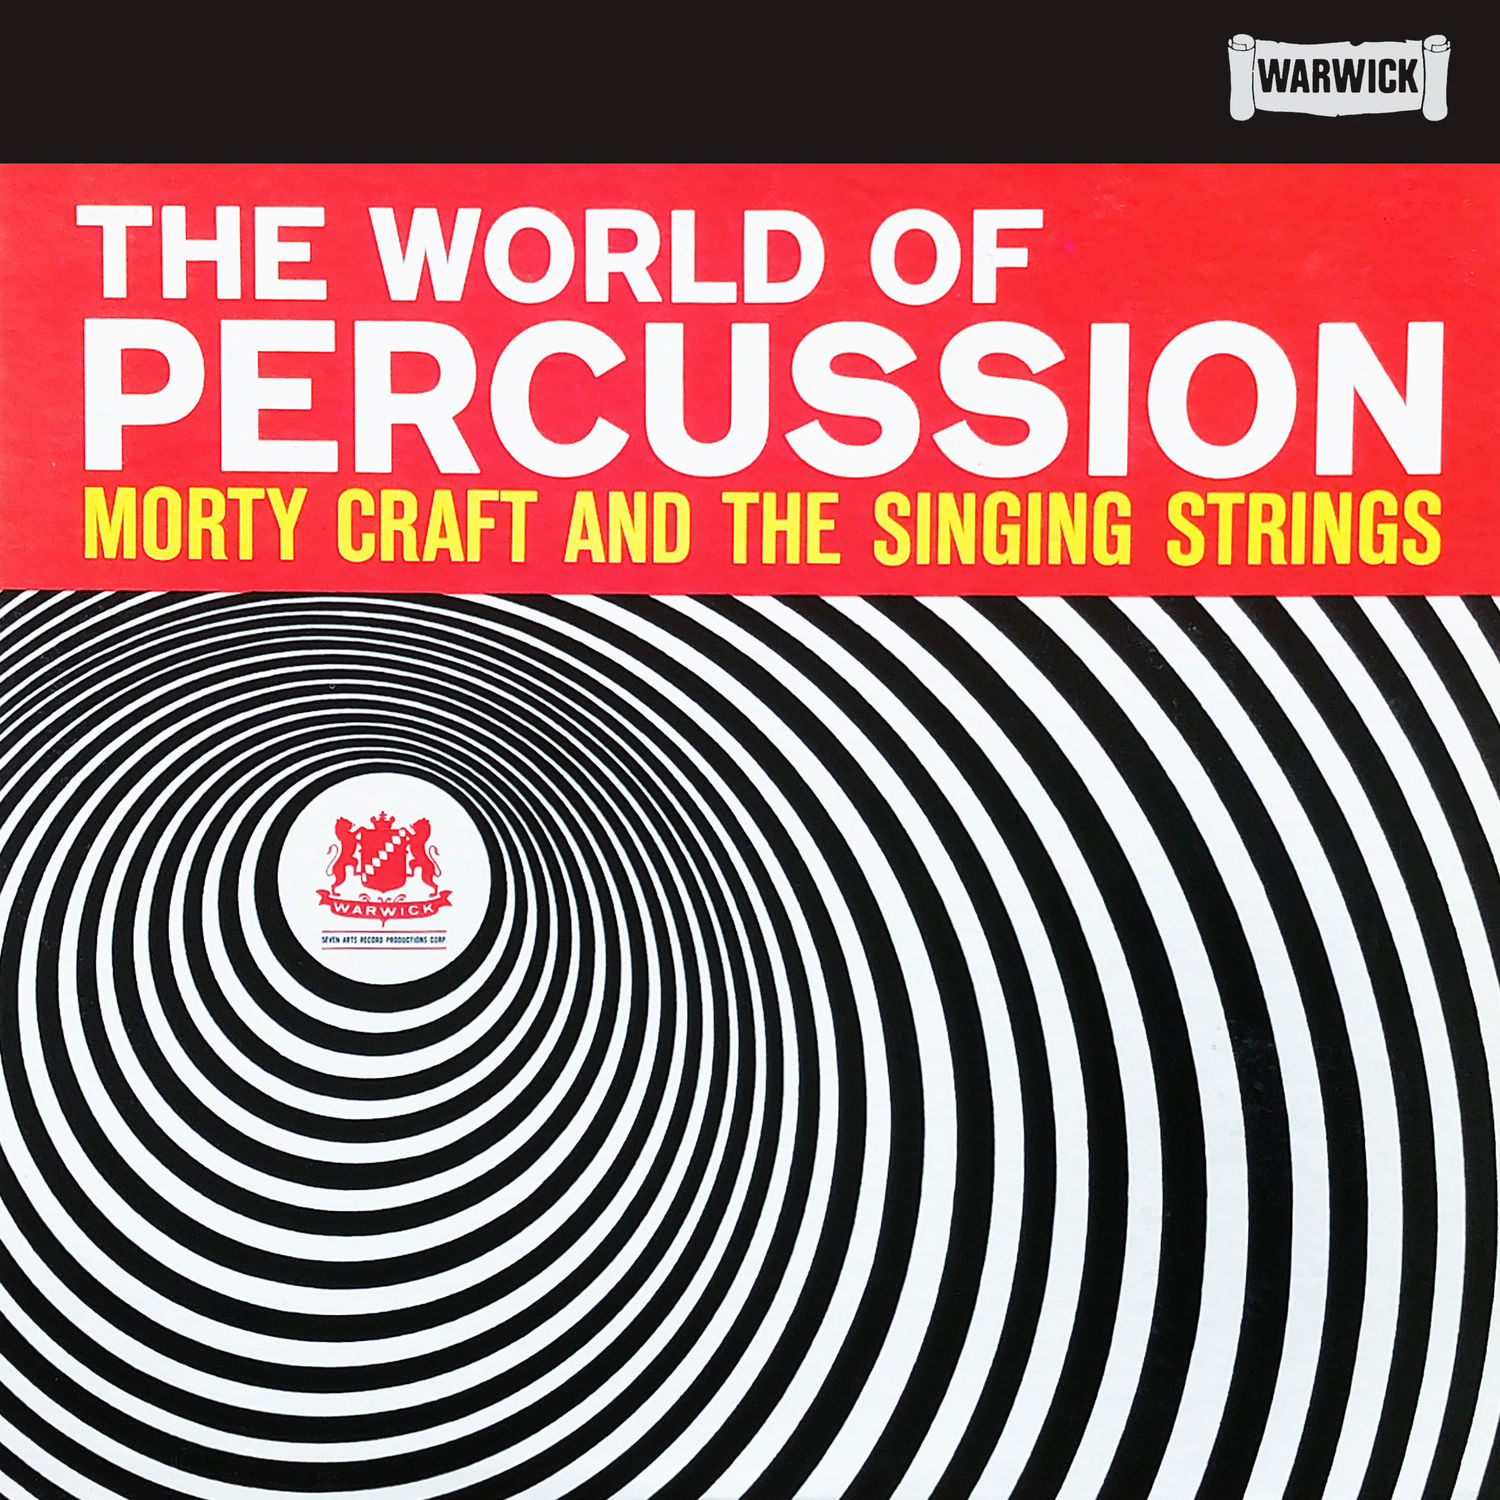 Morty Craft And The Singing Strings – The World of Percussion (1961/2021) [FLAC 24bit/96kHz]